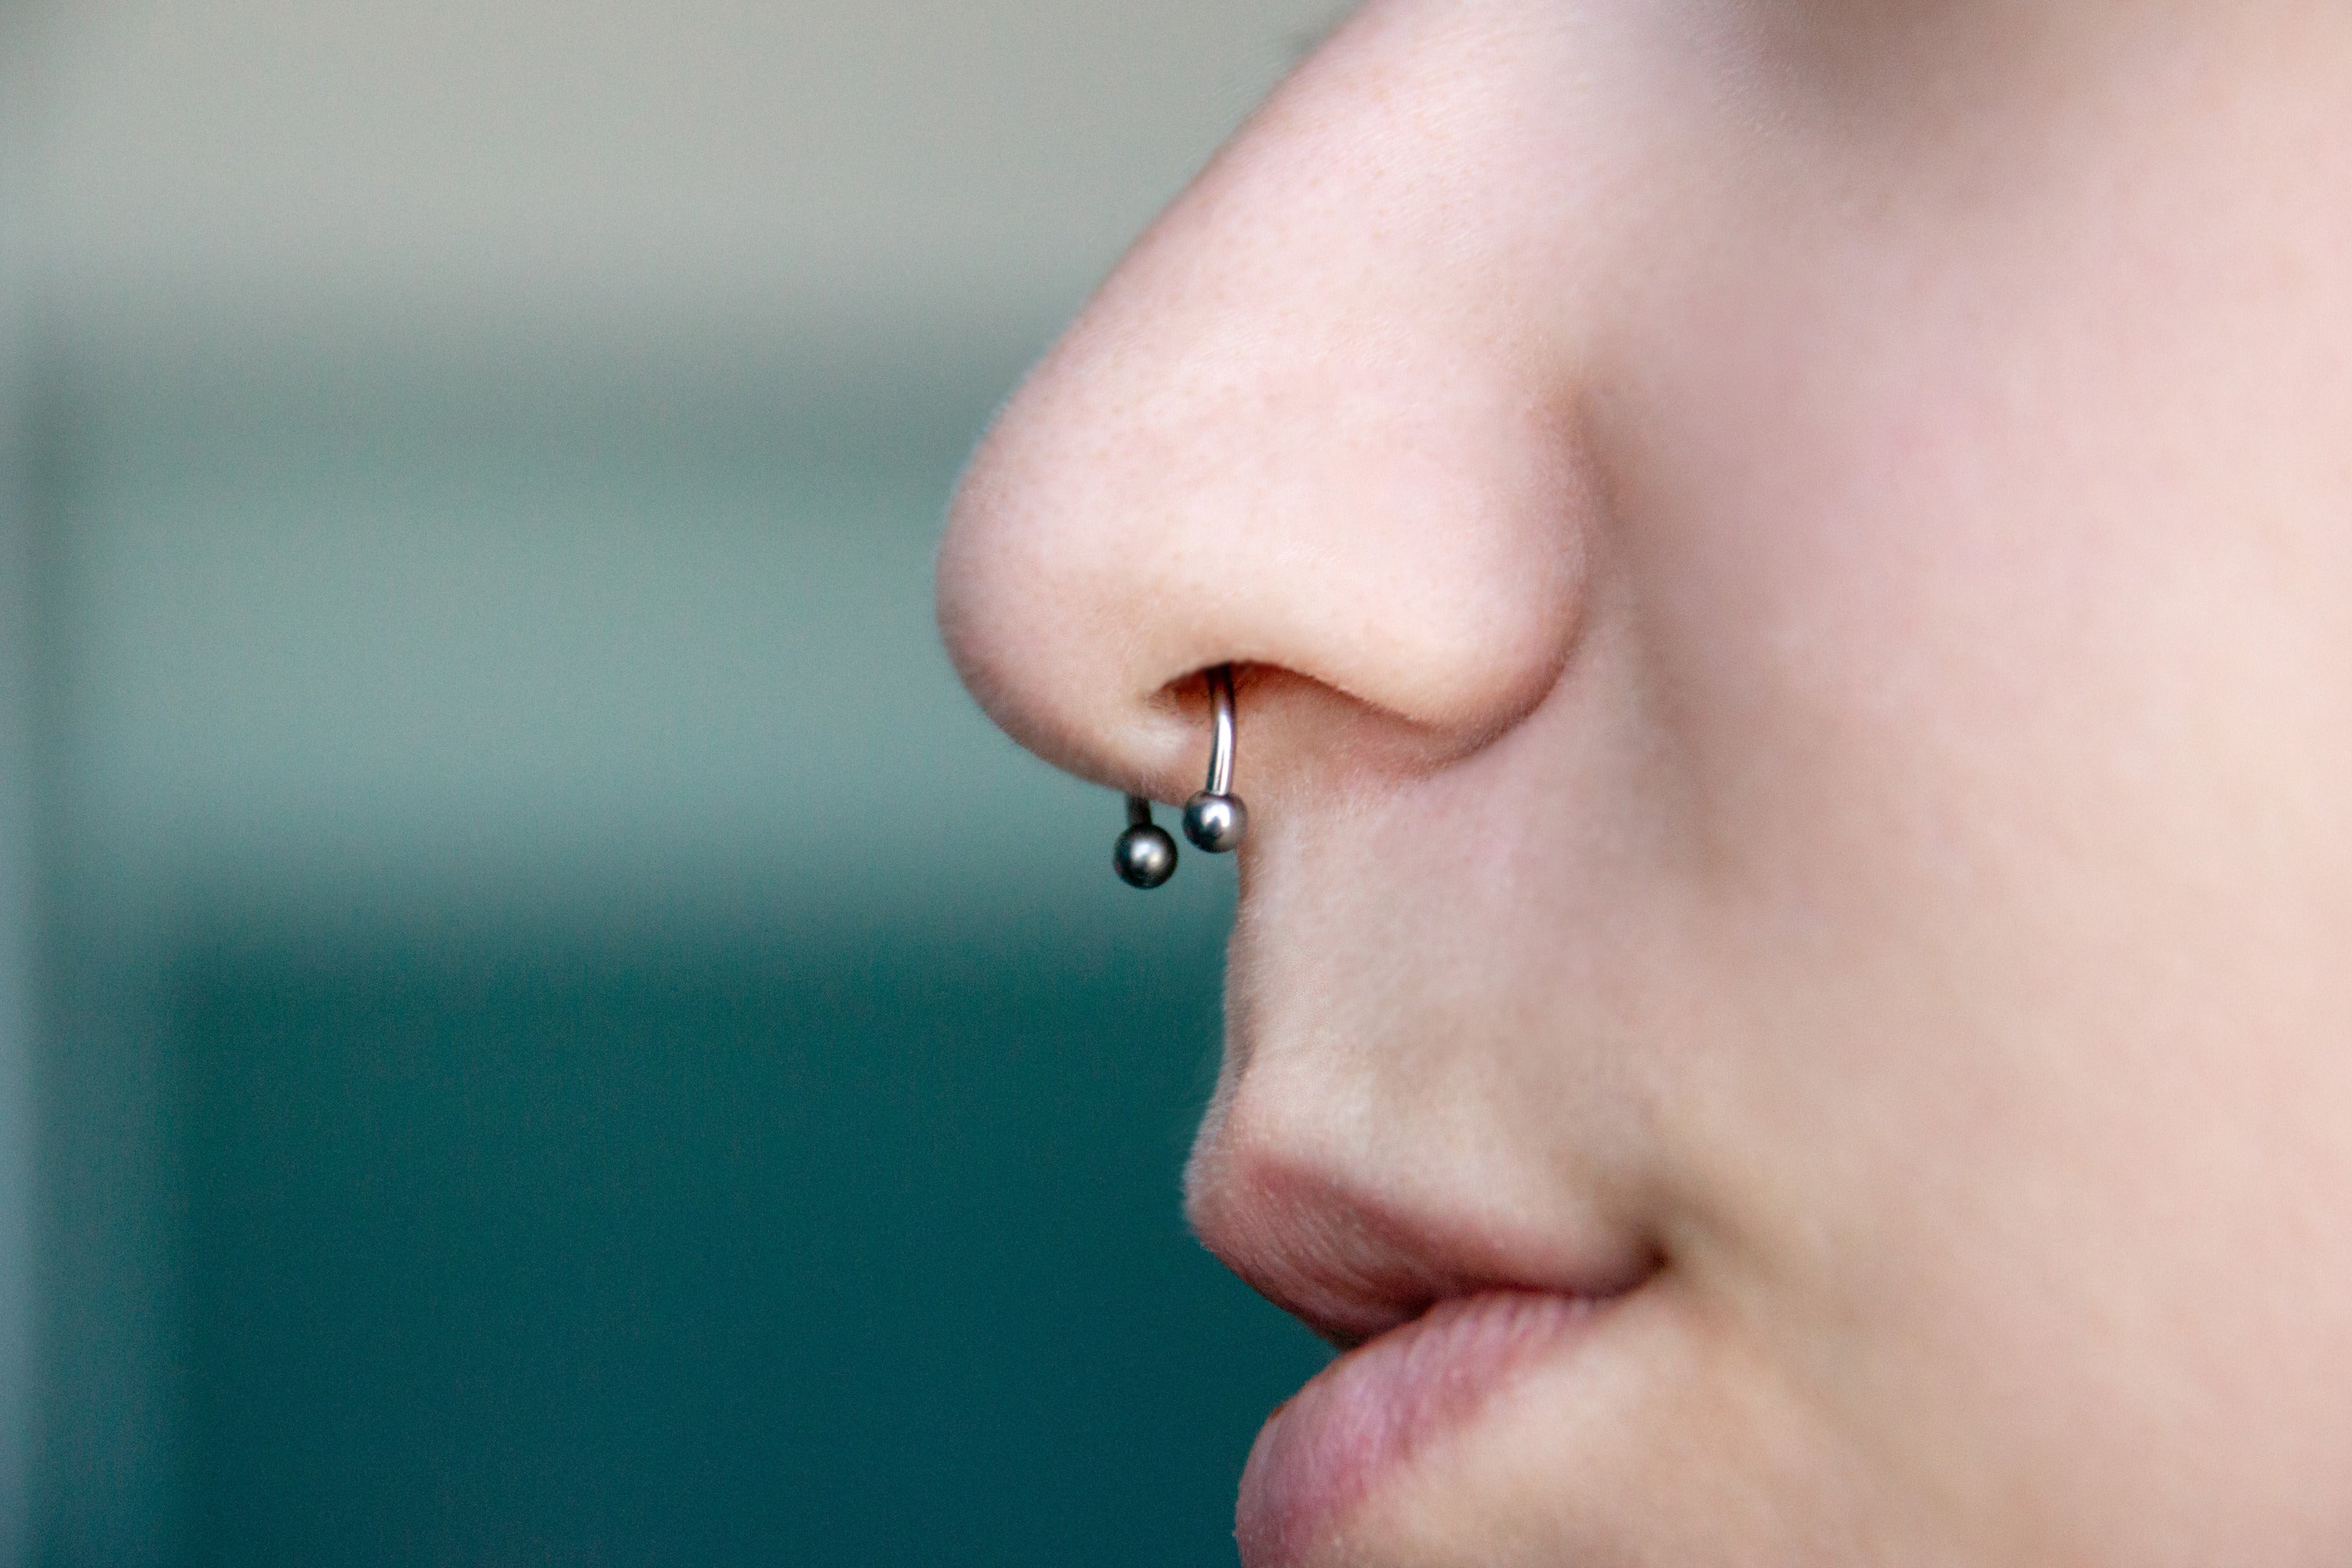 The least painful face piercing